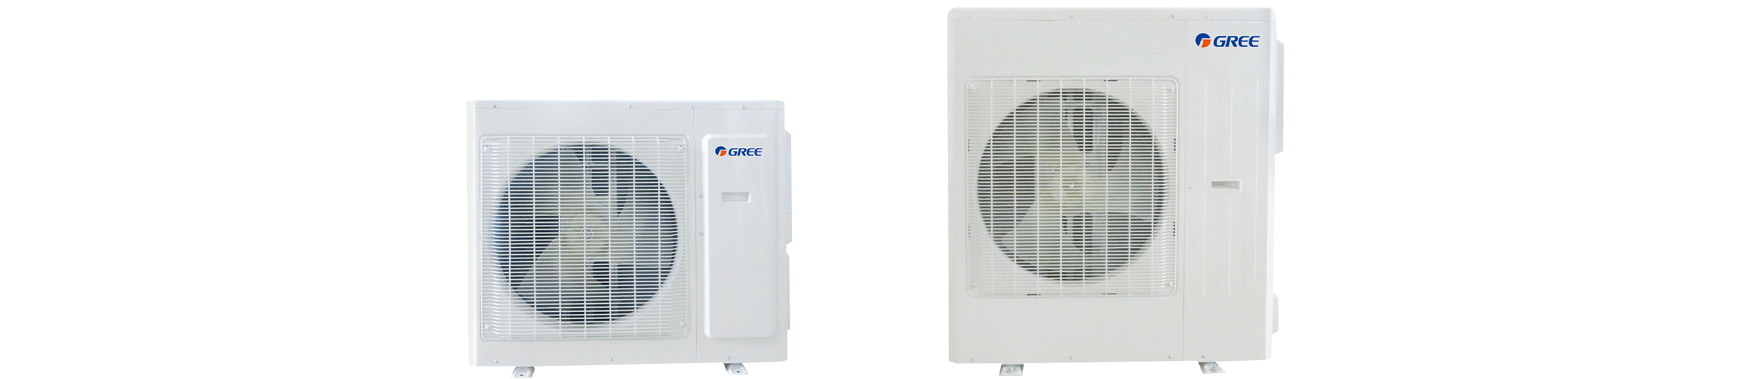 GREE Comfort Multi GEN2 multi-zone heating and cooling unit